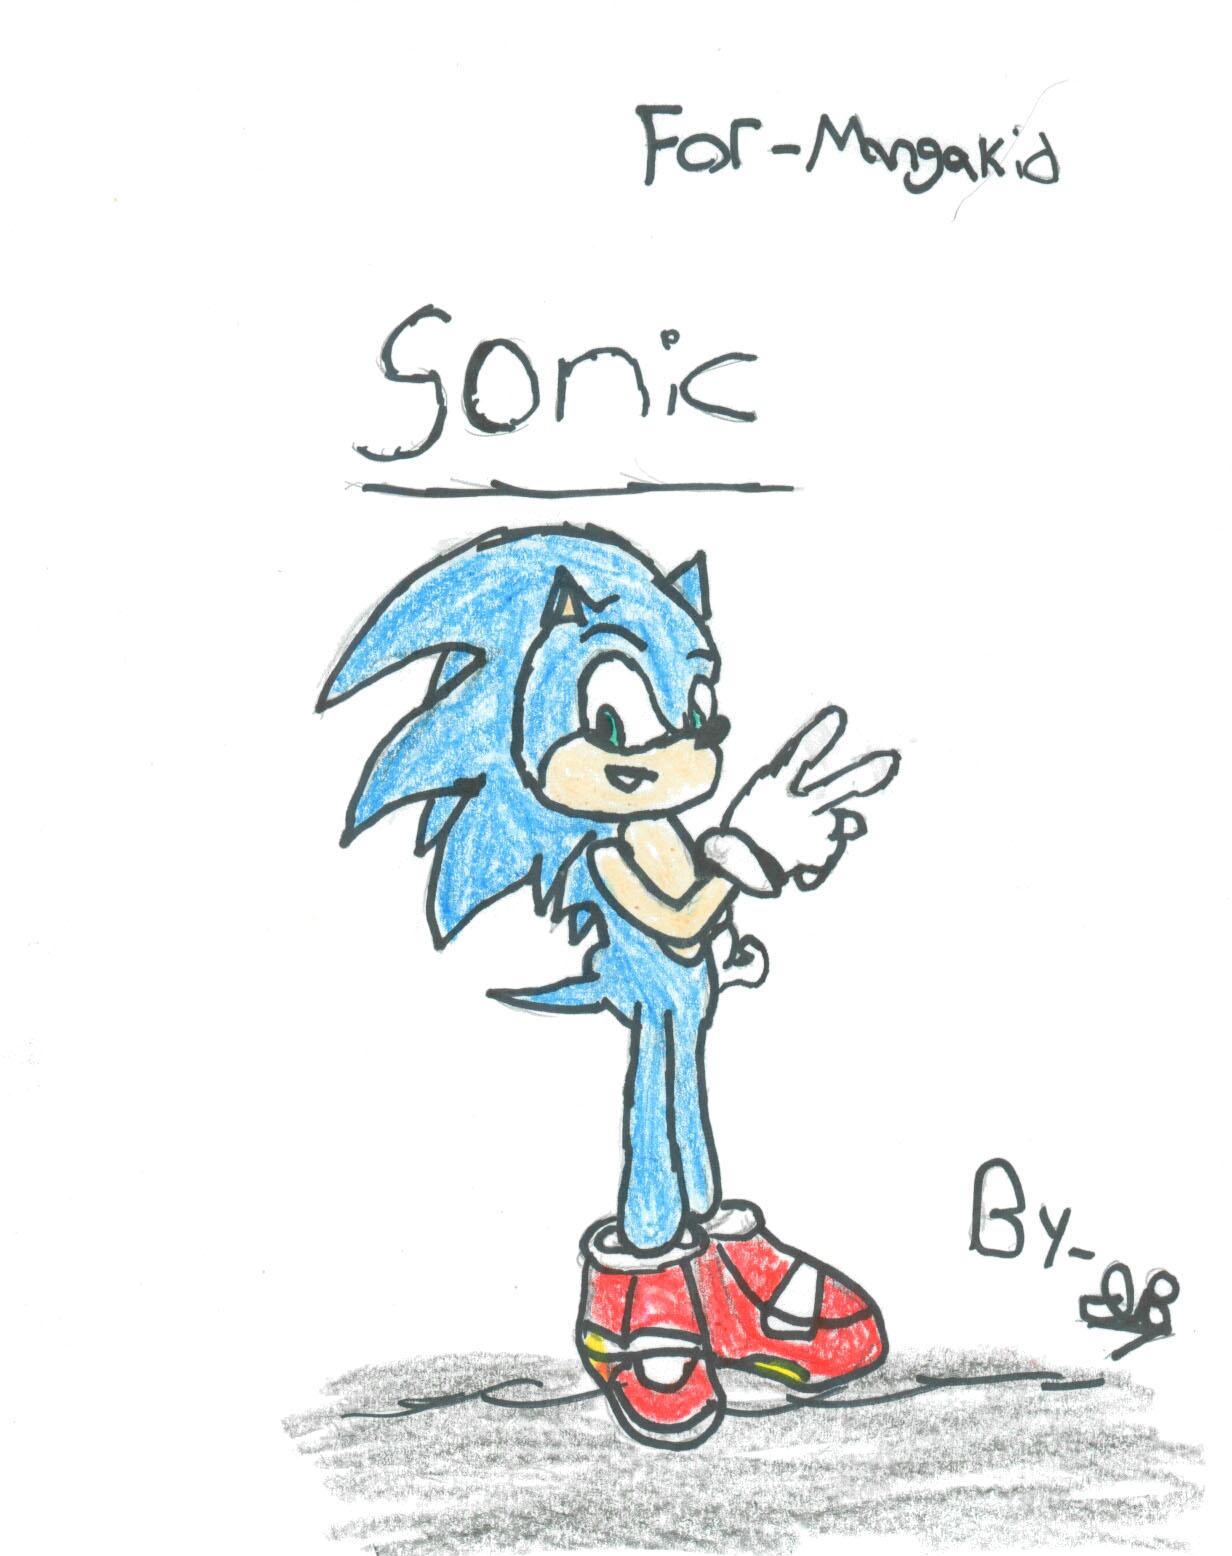 !(Request from MangaKid) Sonic by SSGoshin4